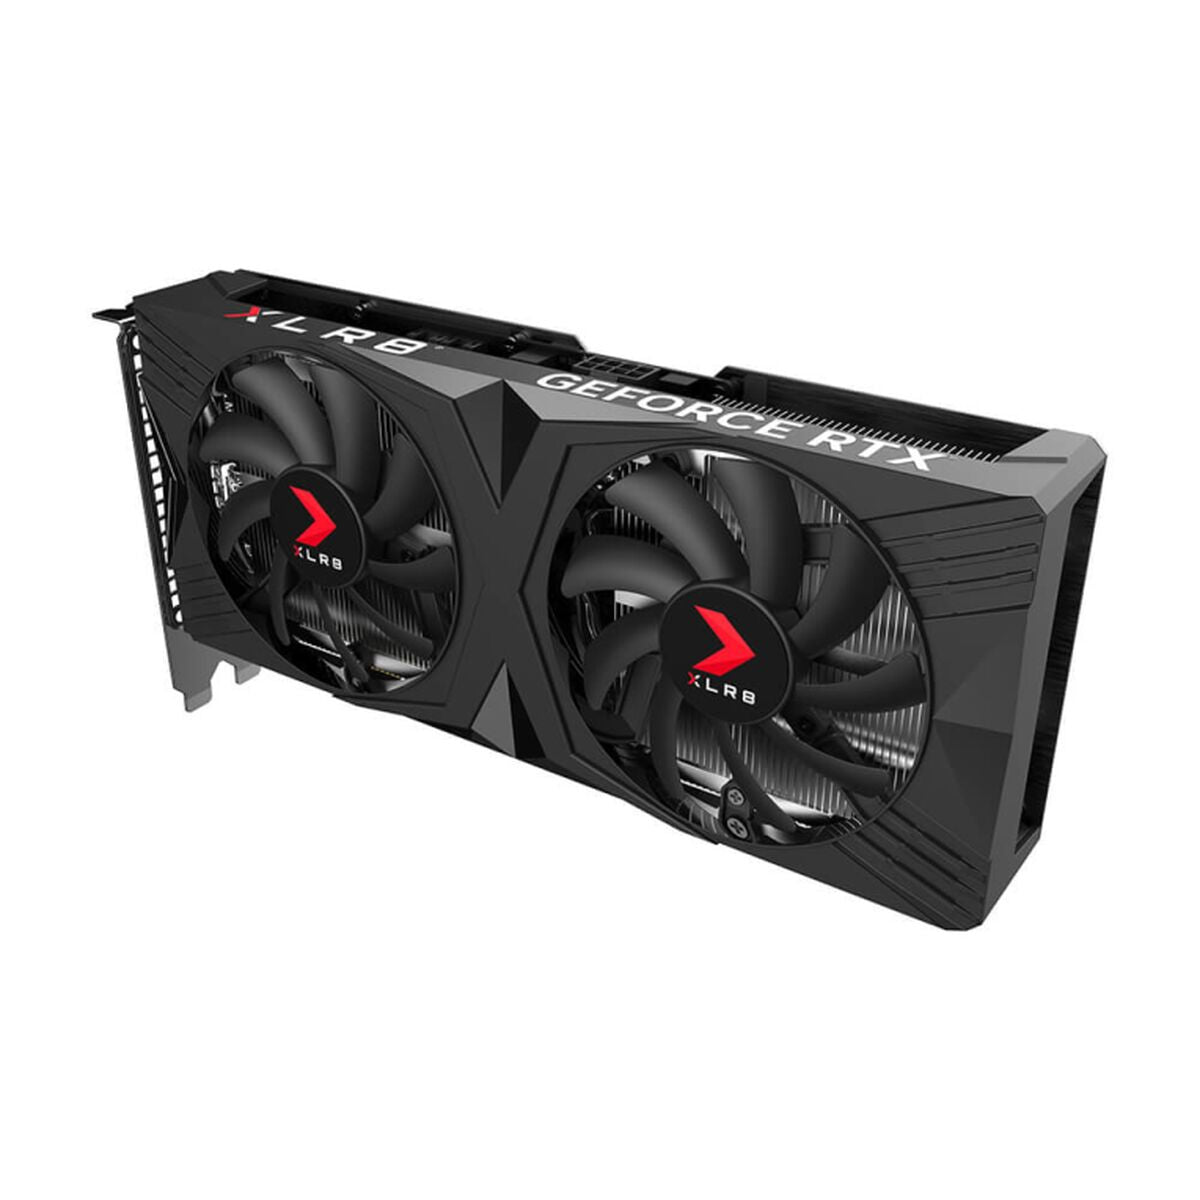 Graphics card PNY GEFORCE RTX 4060 Ti Geforce RTX 4060 8 GB GDDR6, PNY, Computing, Components, graphics-card-pny-geforce-rtx-4060-ti-geforce-rtx-4060-8-gb-gddr6, Brand_PNY, category-reference-2609, category-reference-2803, category-reference-2812, category-reference-t-19685, category-reference-t-19912, category-reference-t-21360, category-reference-t-25665, computers / components, Condition_NEW, Price_400 - 500, Teleworking, RiotNook